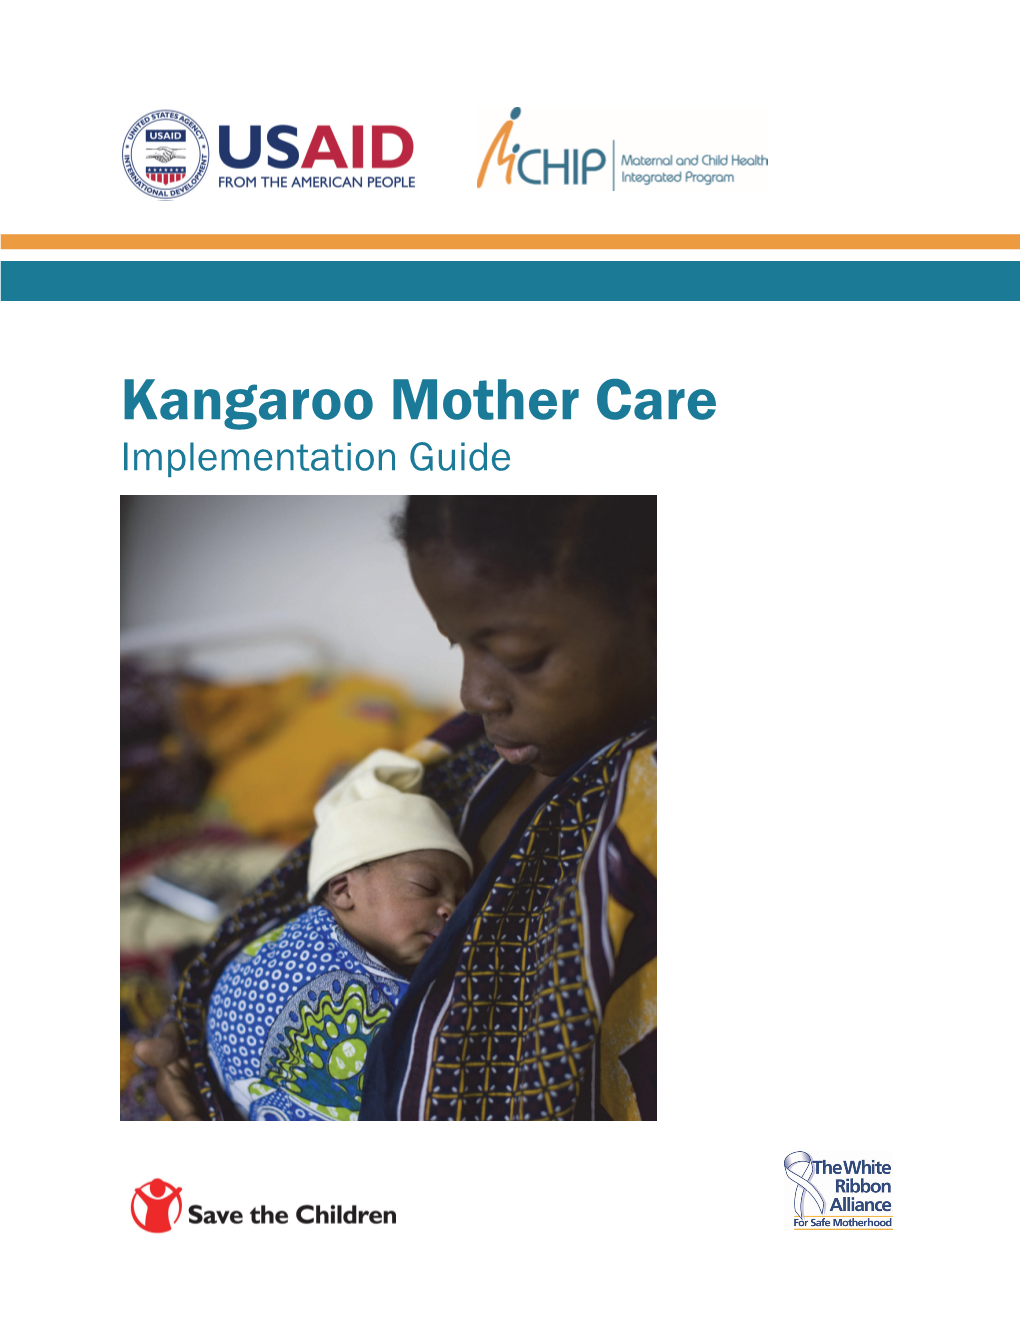 Kangaroo Mother Care Implementation Guide